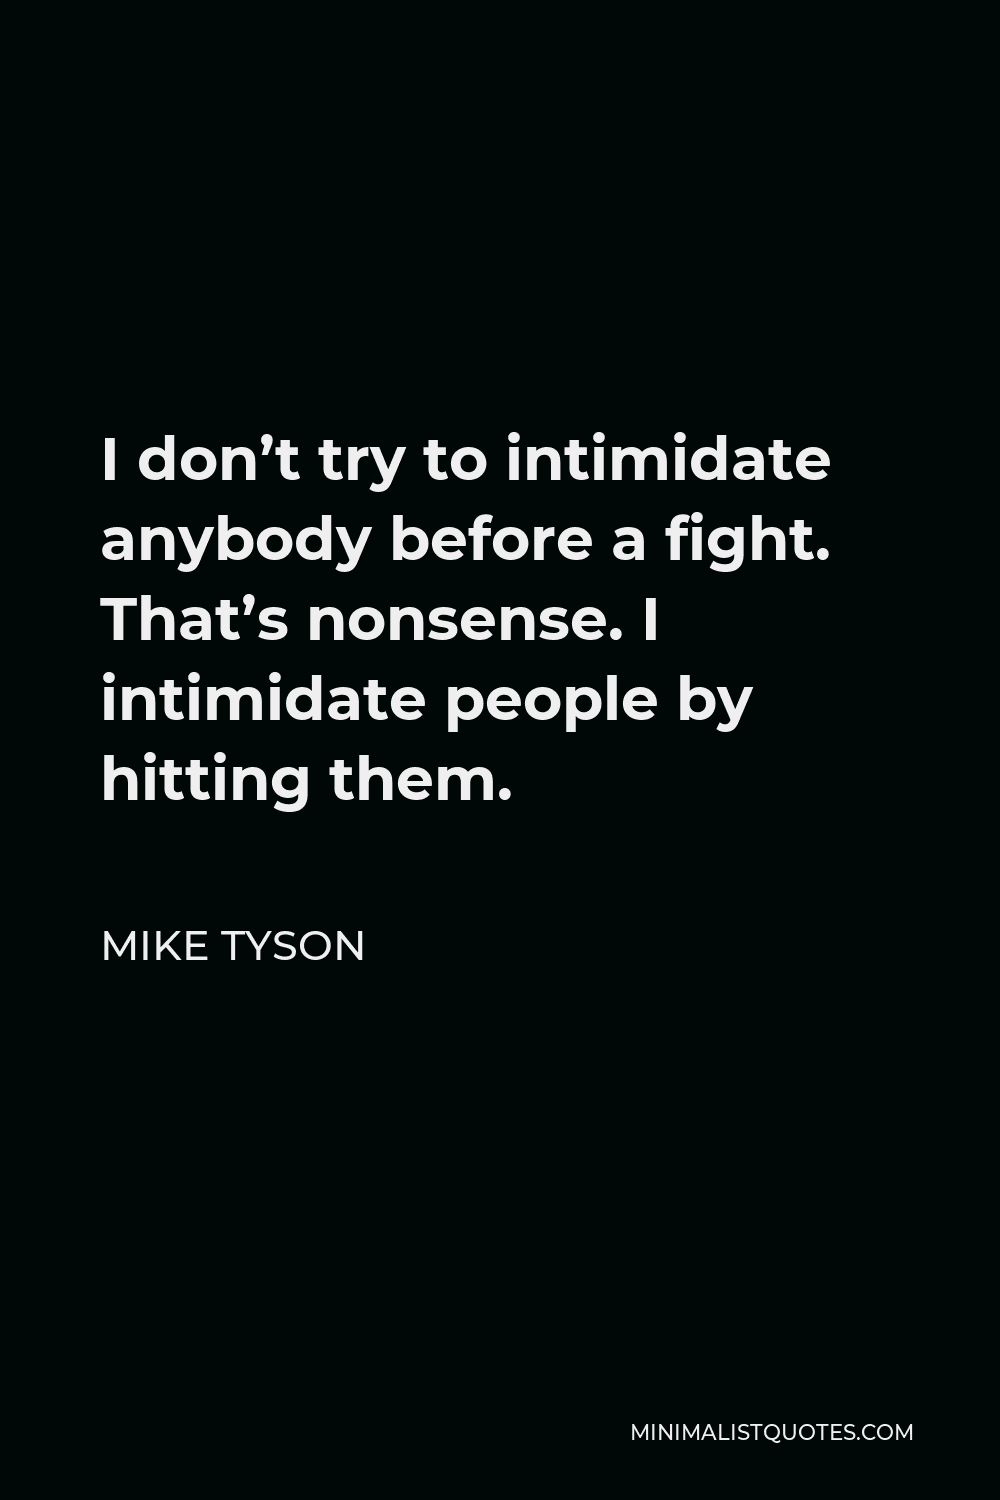 Mike Tyson Quote - I don’t try to intimidate anybody before a fight. That’s nonsense. I intimidate people by hitting them.